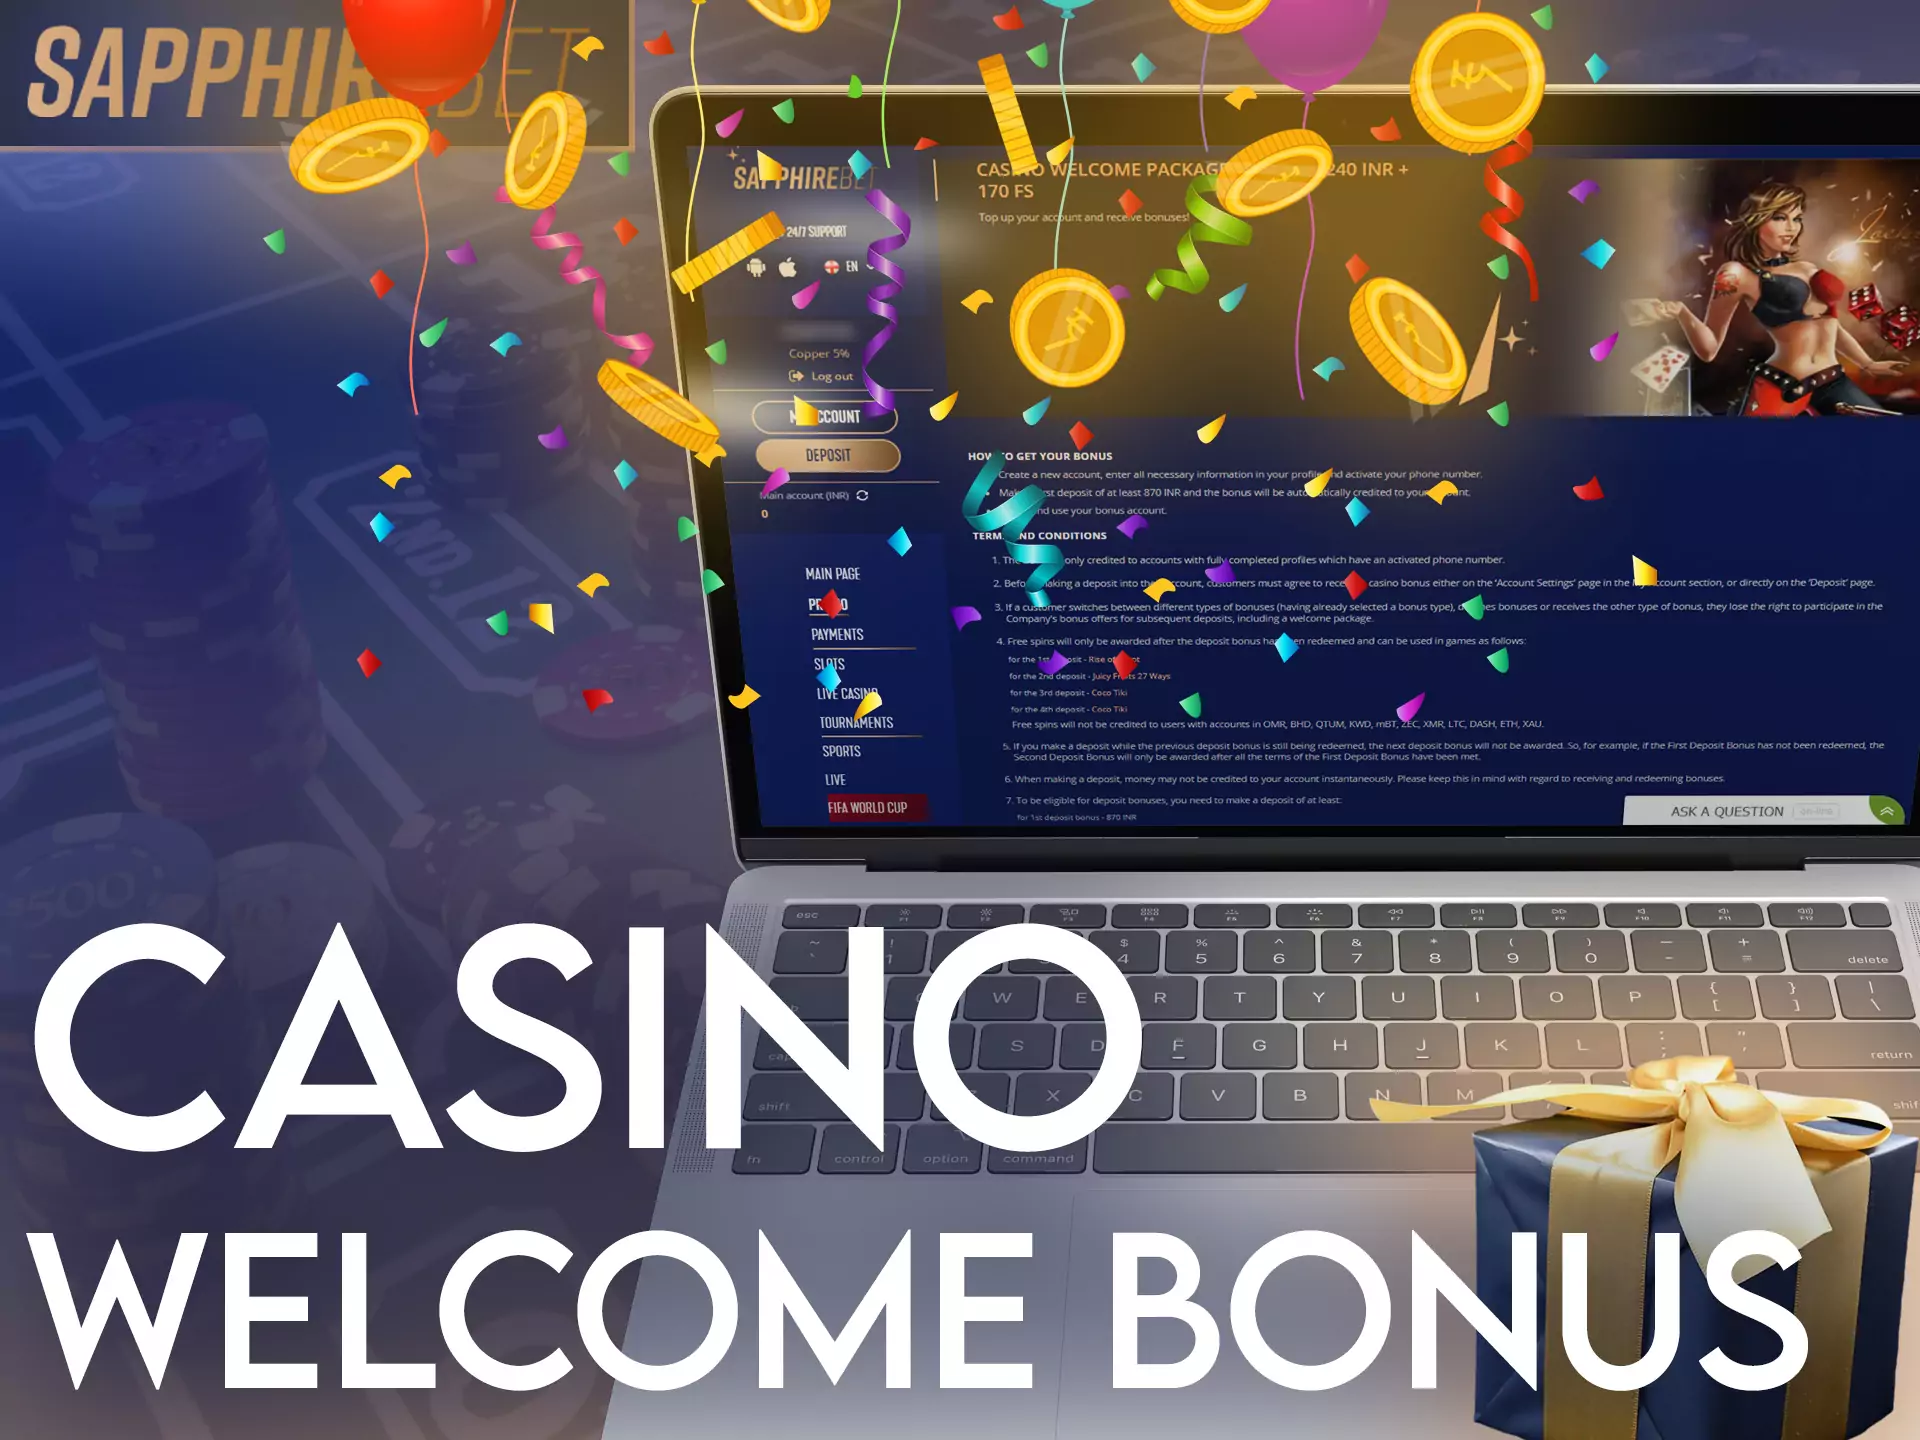 Sapphirebet has a special welcome bonus for the casino, try it.